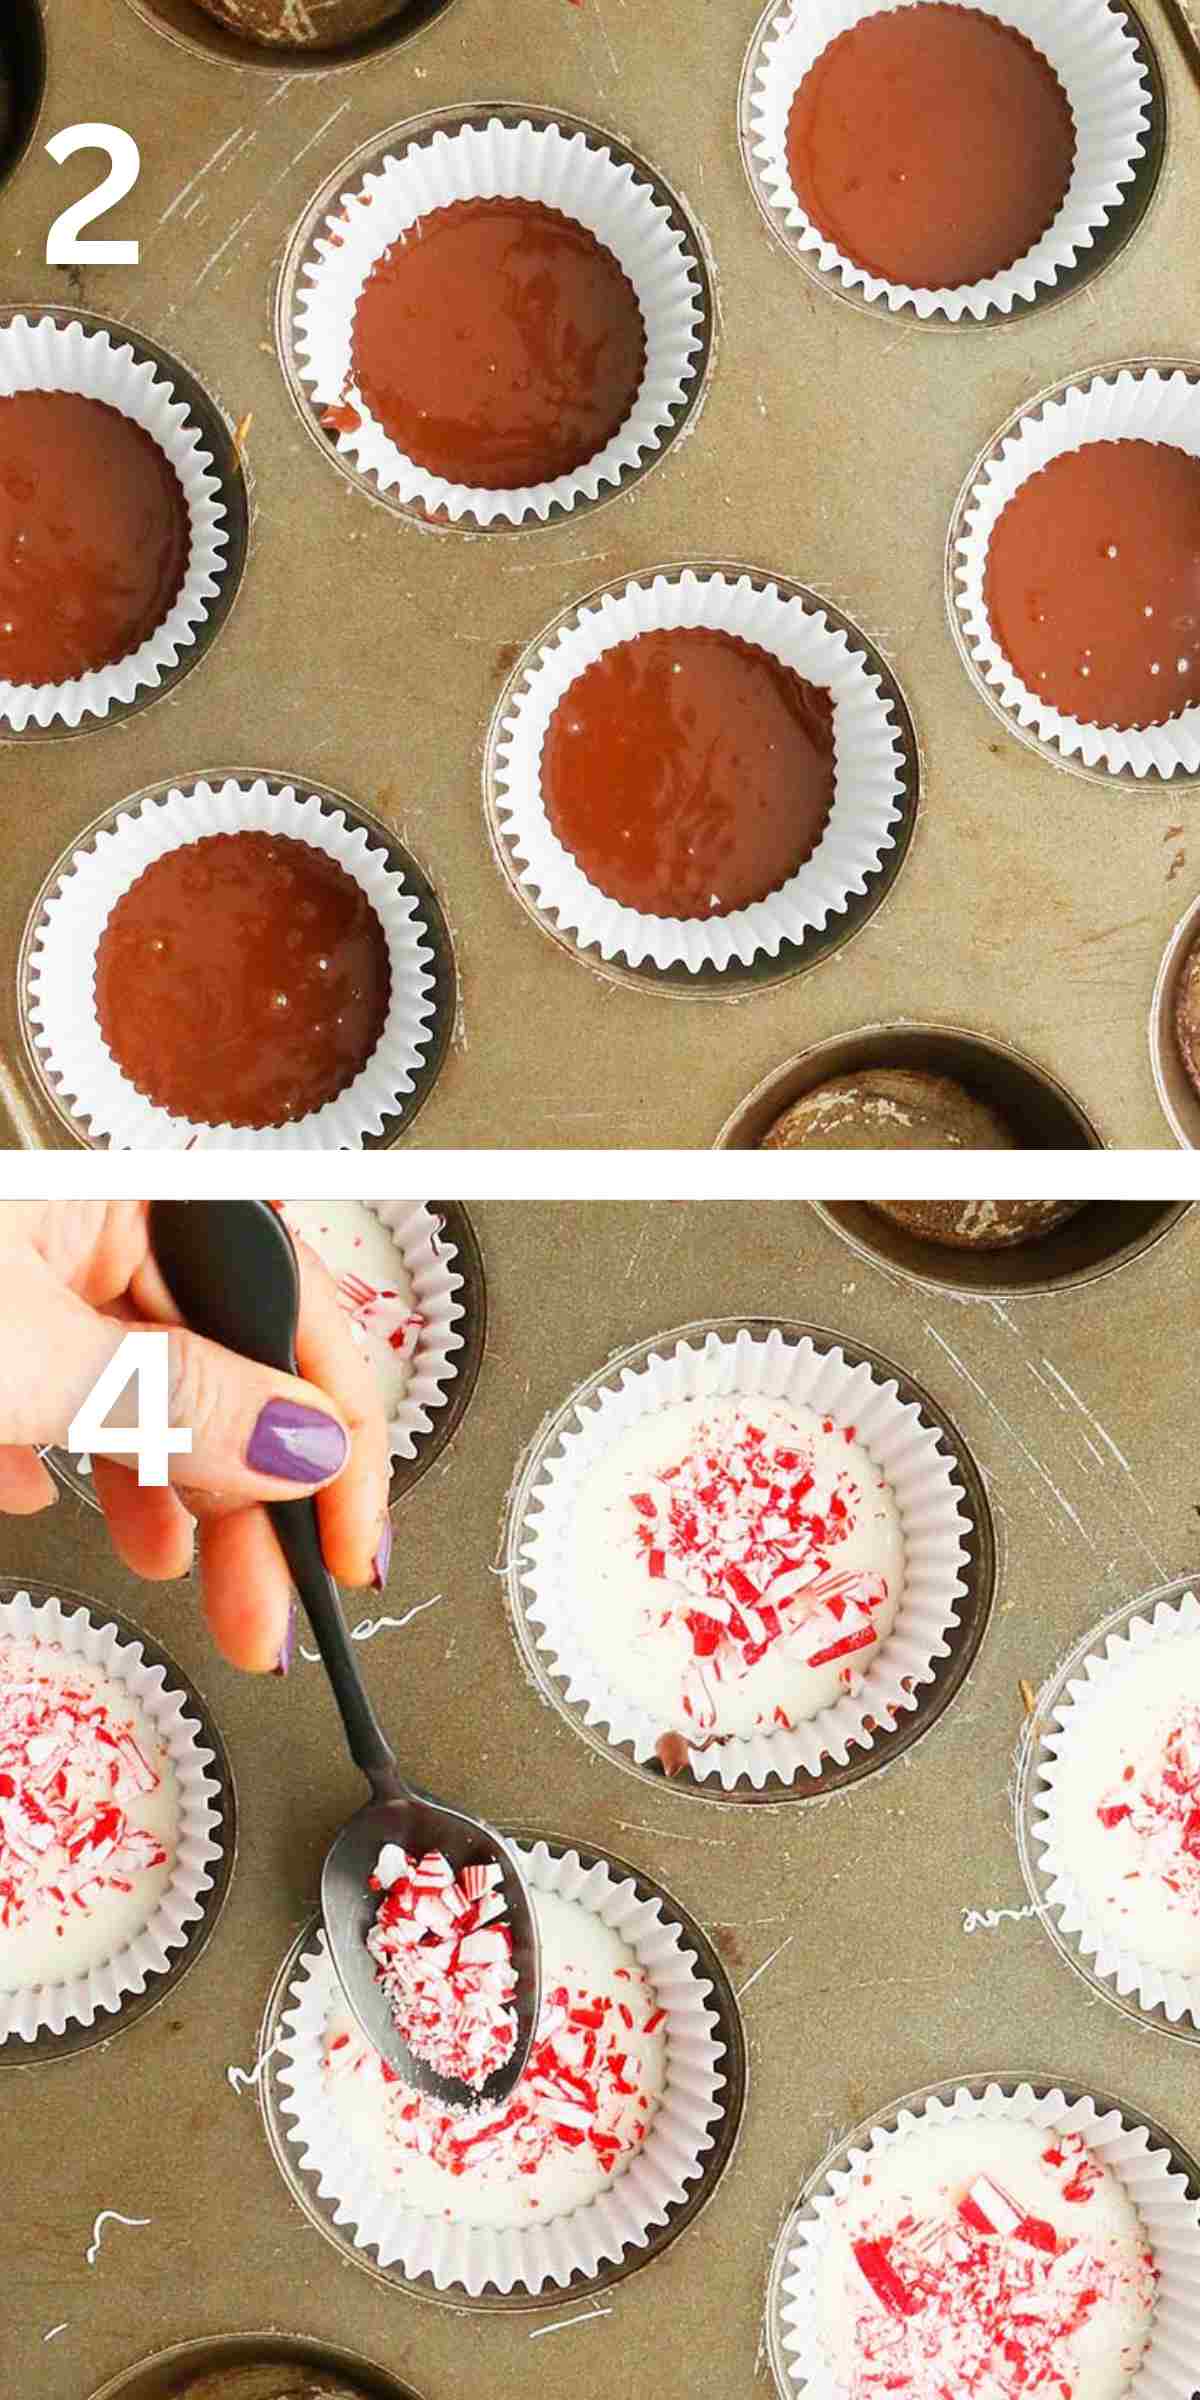 2 photo collage of pouring melted chocolate into a muffin pan. 